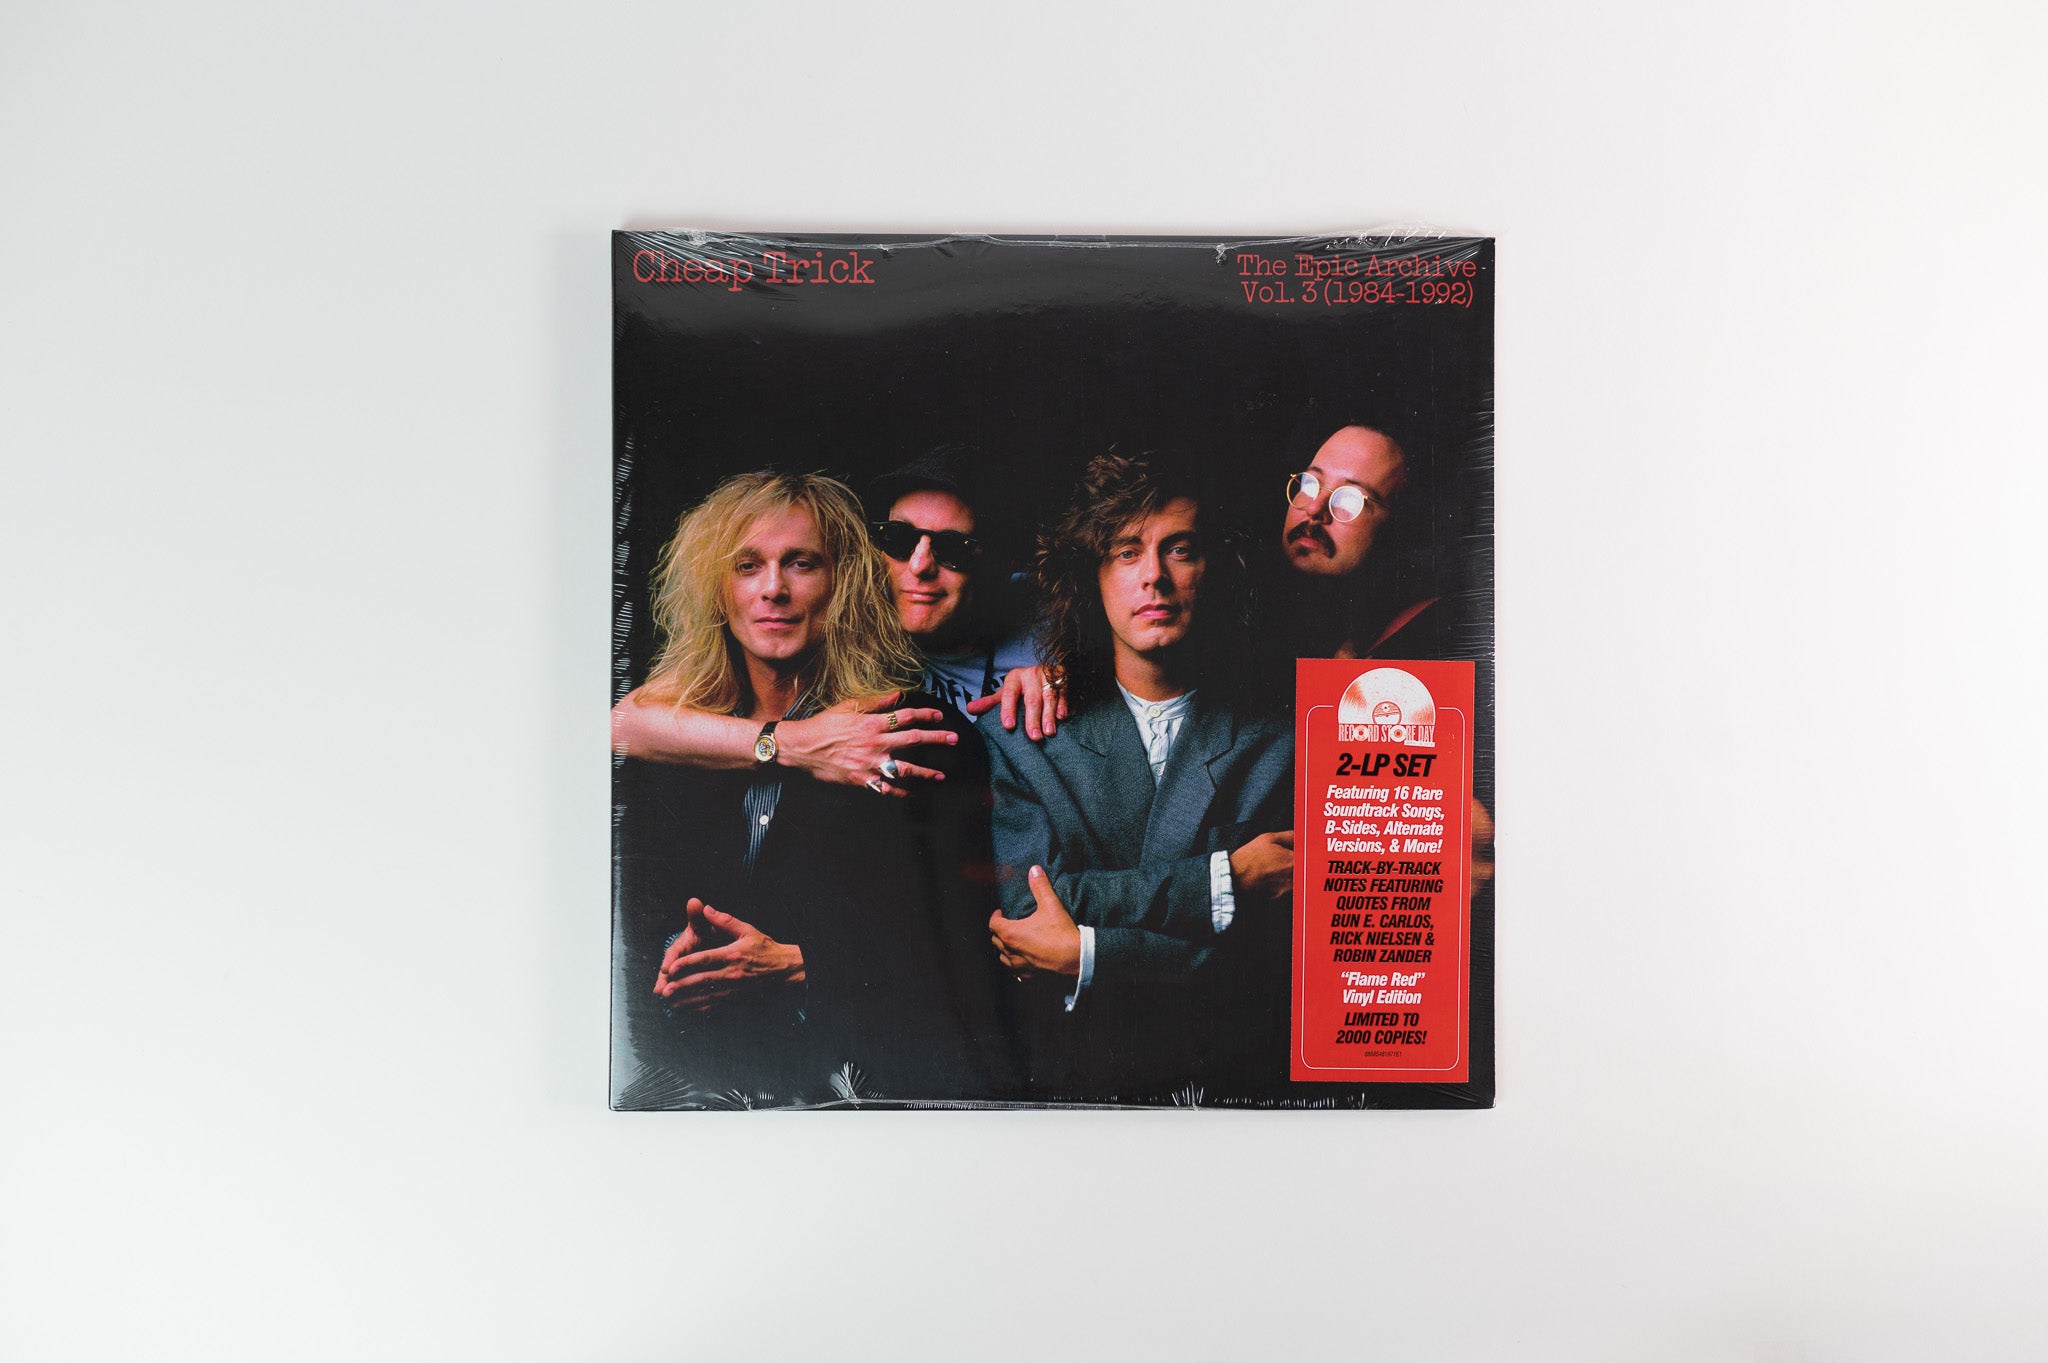 Cheap Trick - The Epic Archive Vol. 3 (1984-1992) on Real Gone / Epic - Sealed RSD Red Vinyl pressing